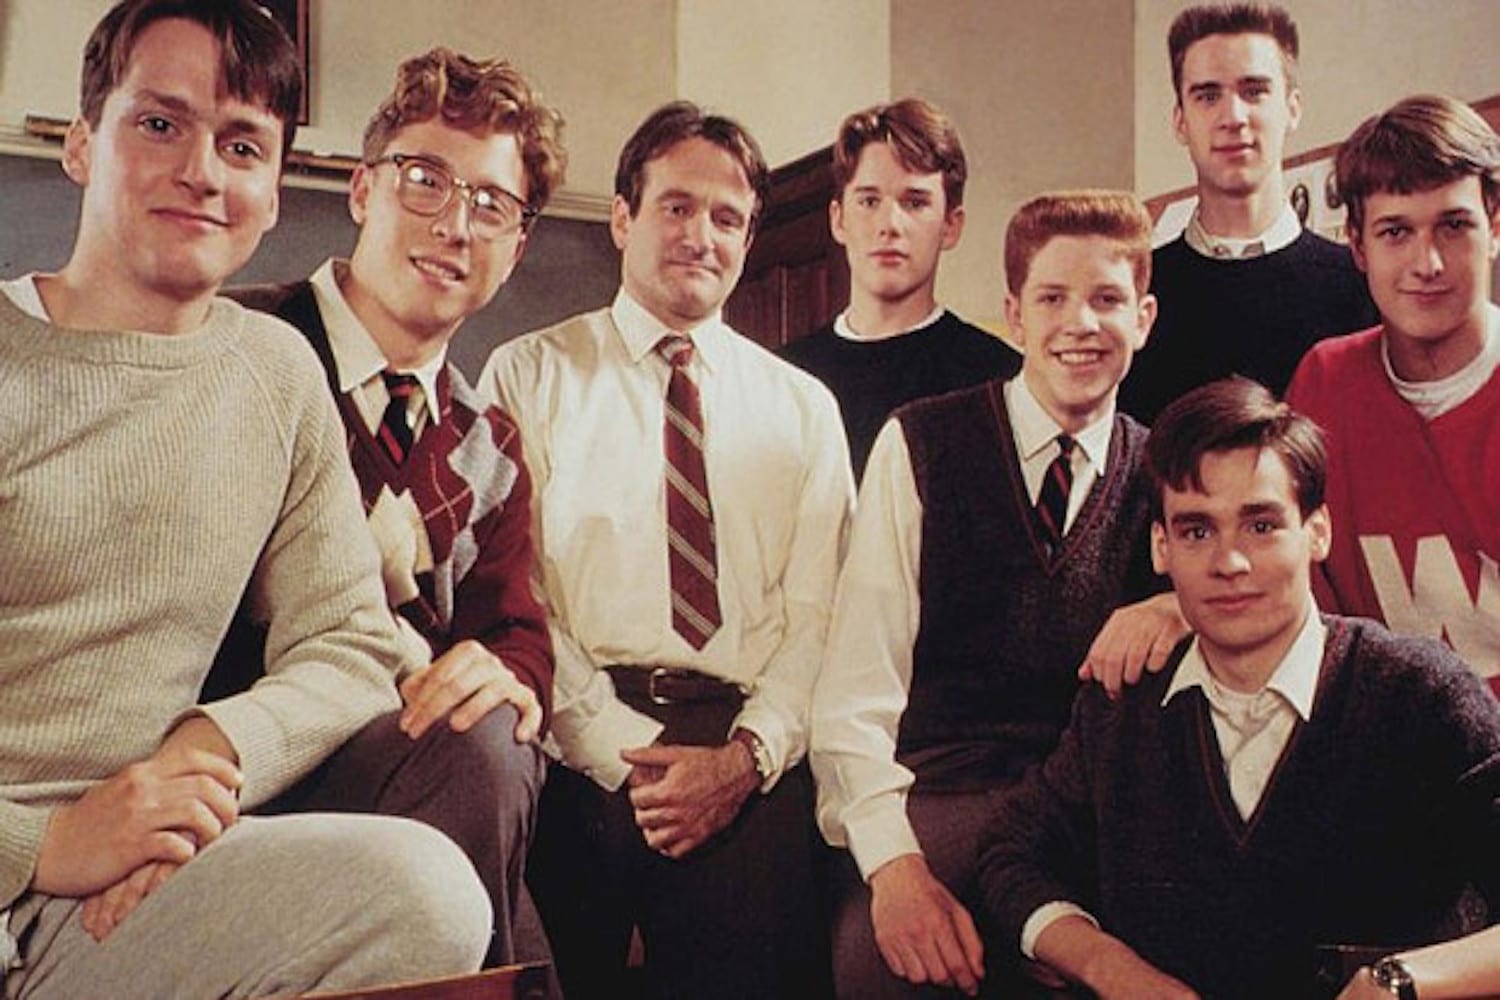 exposition of dead poets society